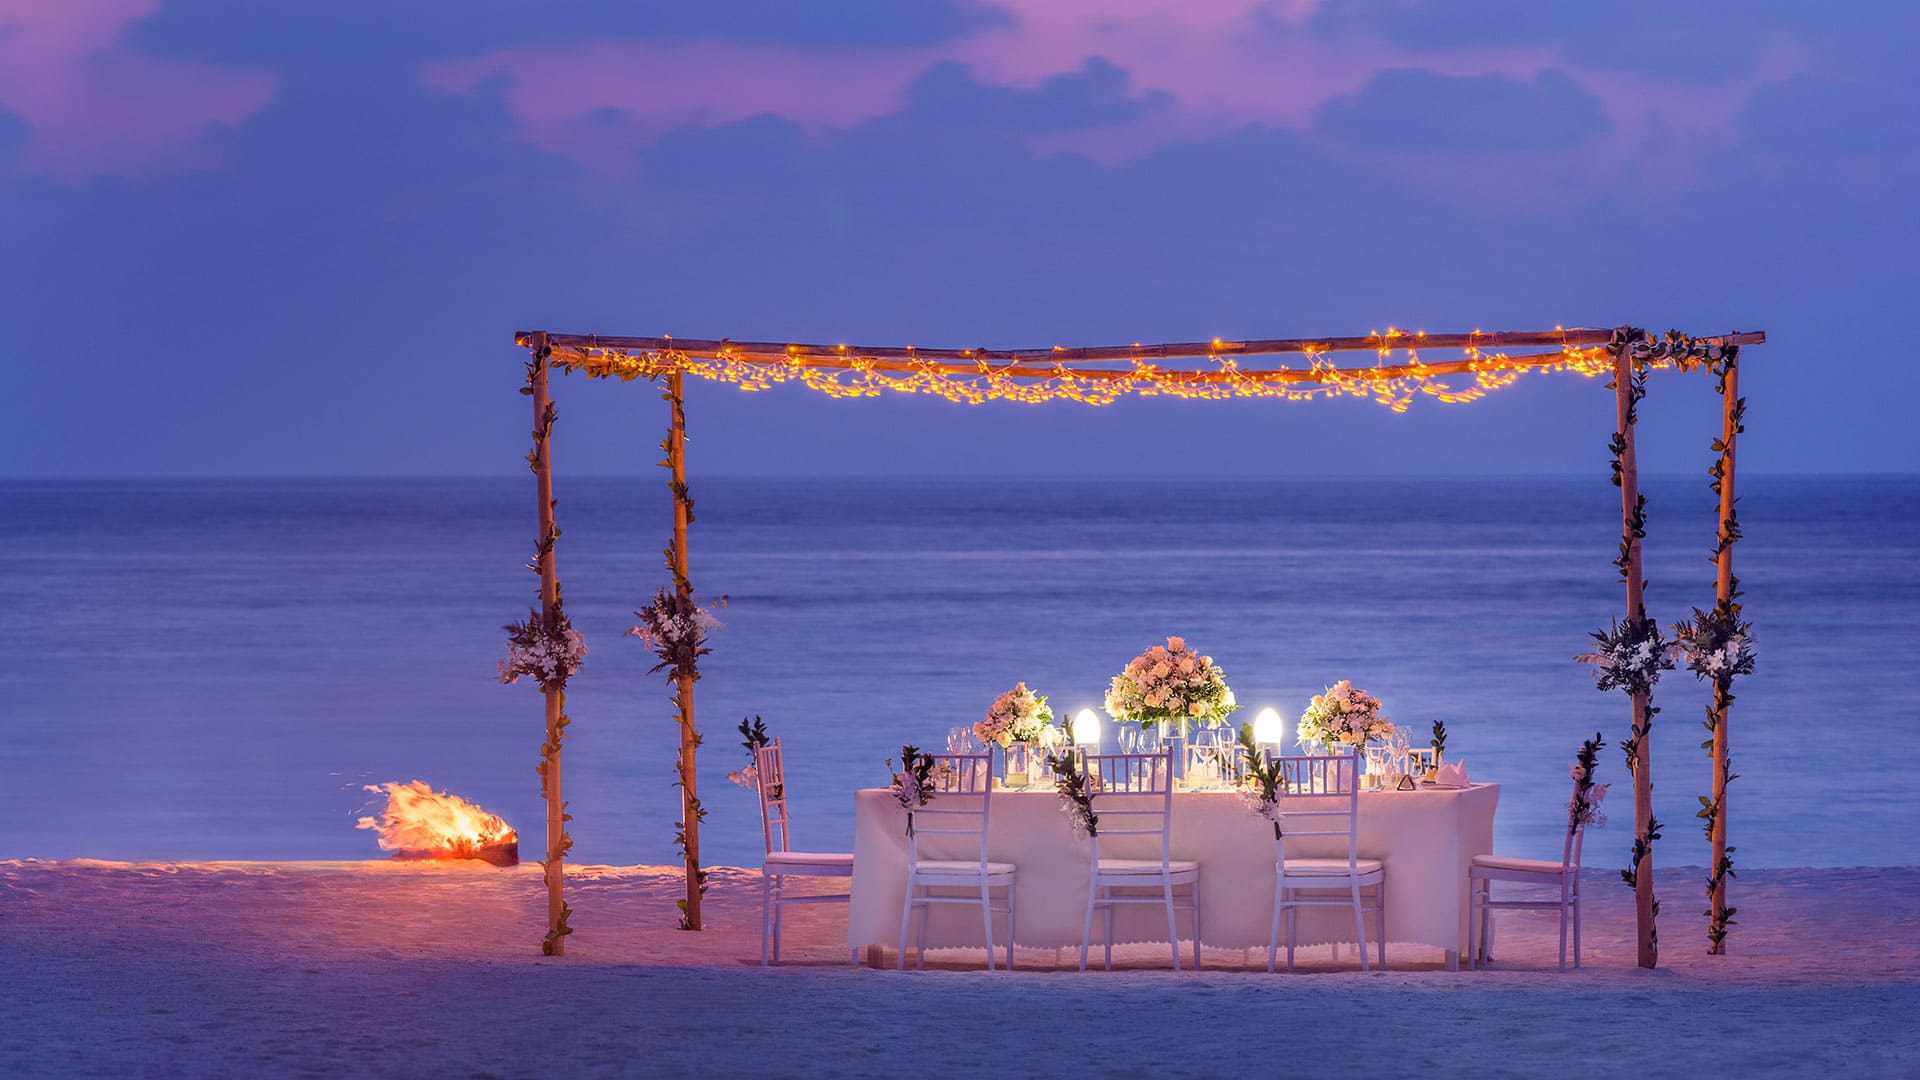 Canopy with lights over a fancy white table setting on the beach during dusk.